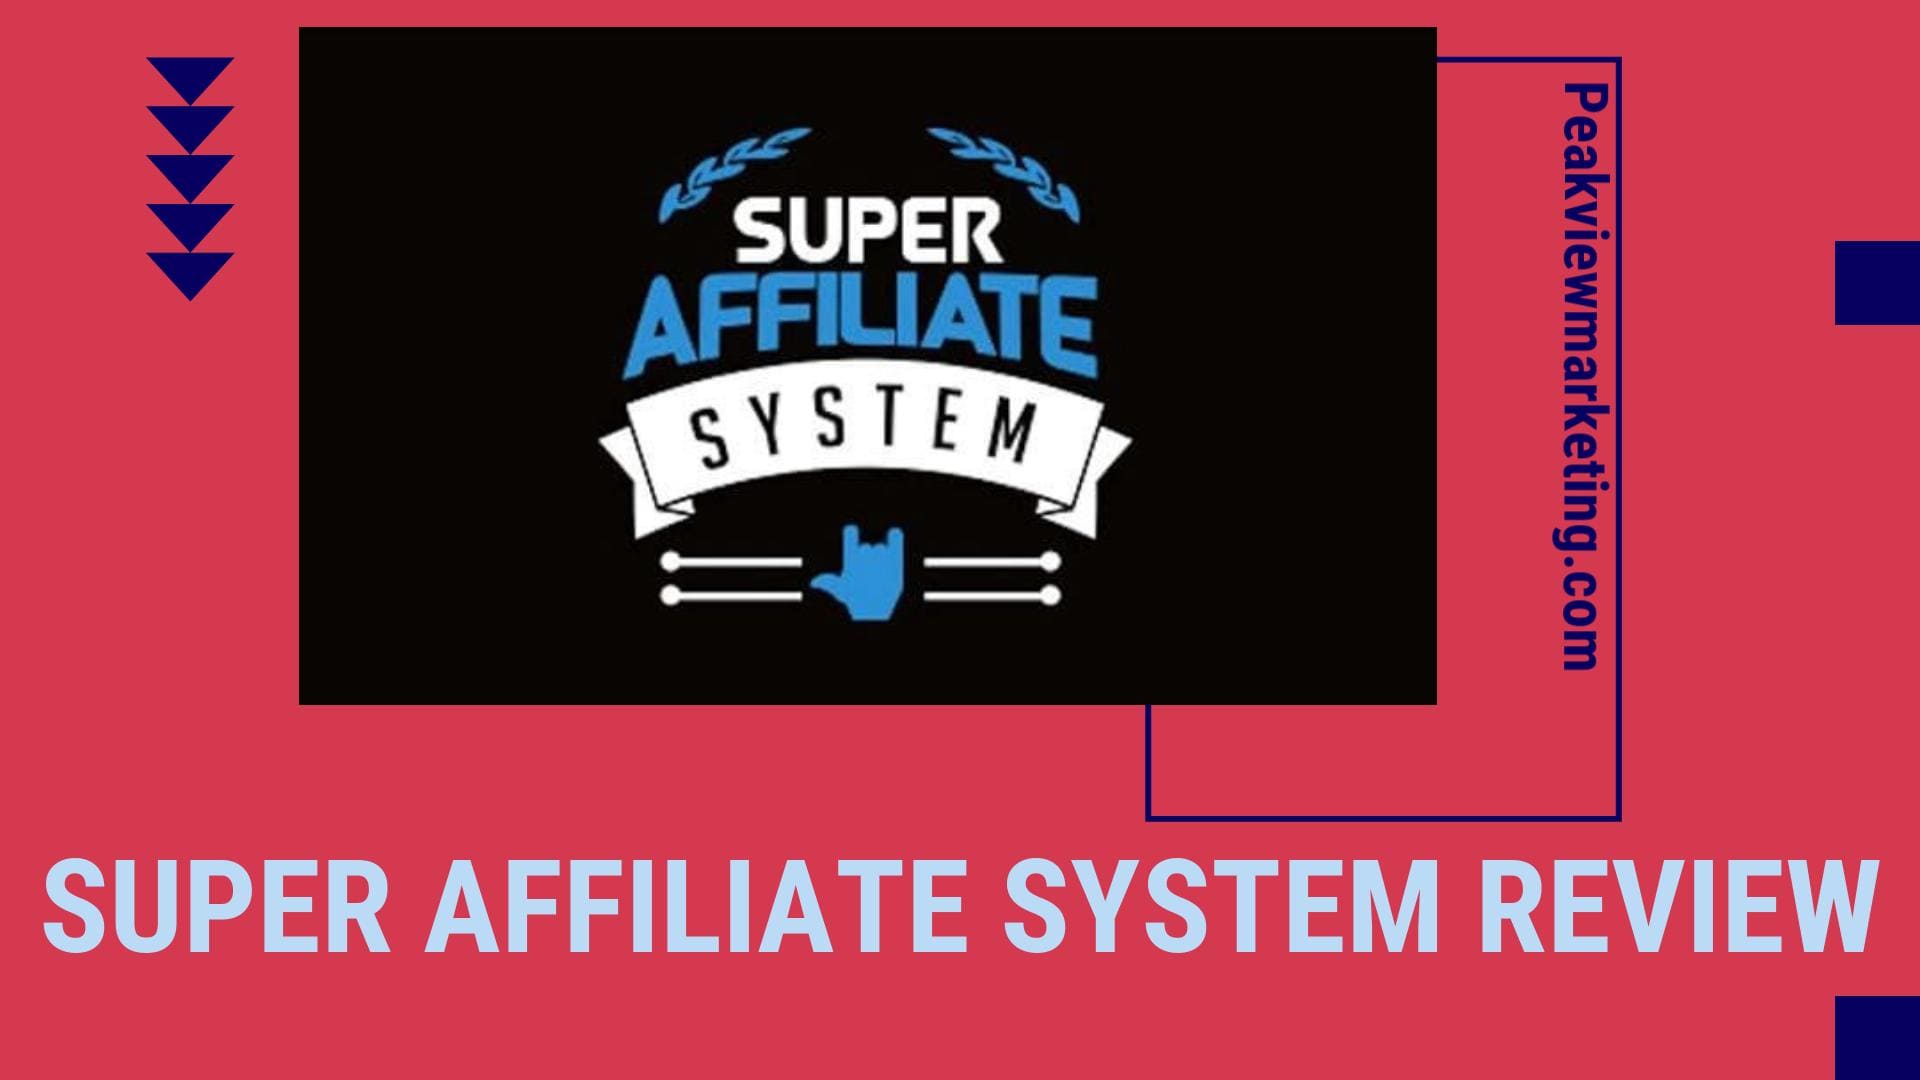 Super Affiliate System Review Image